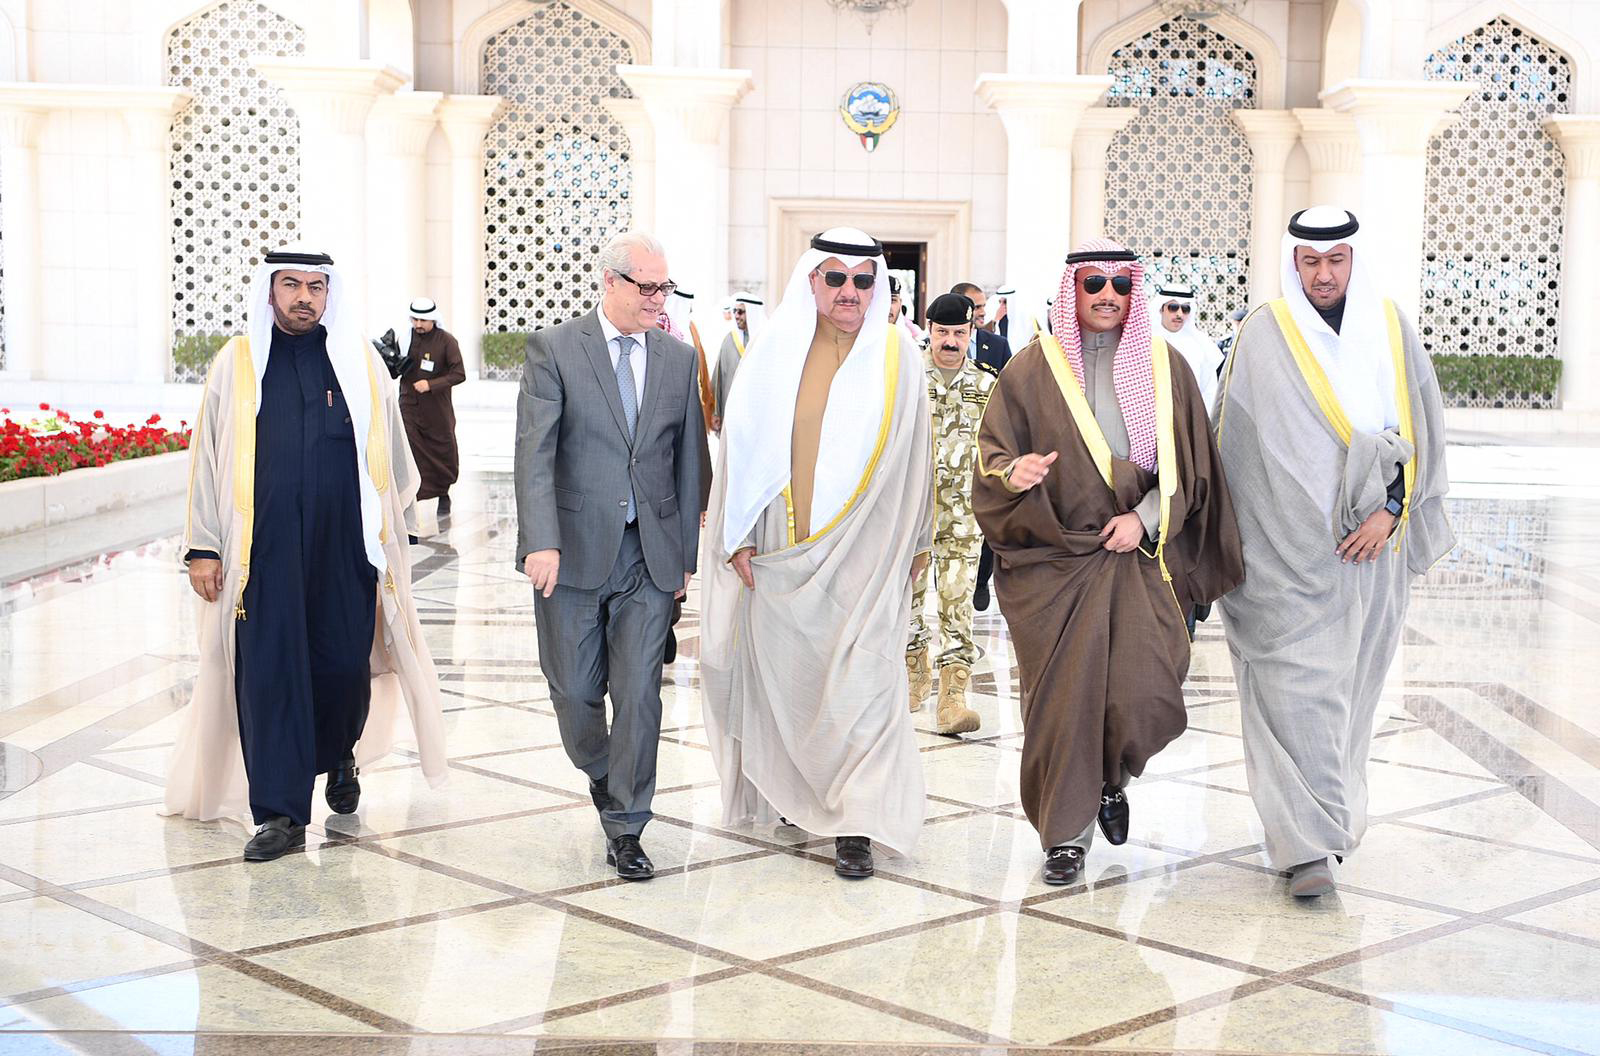 National Assembly Speaker Marzouq Al-Ghanim left for Rabat to attend the 14th conference of the Parliamentary Union of the Organization of Islamic Cooperation's Member States (PUIC)